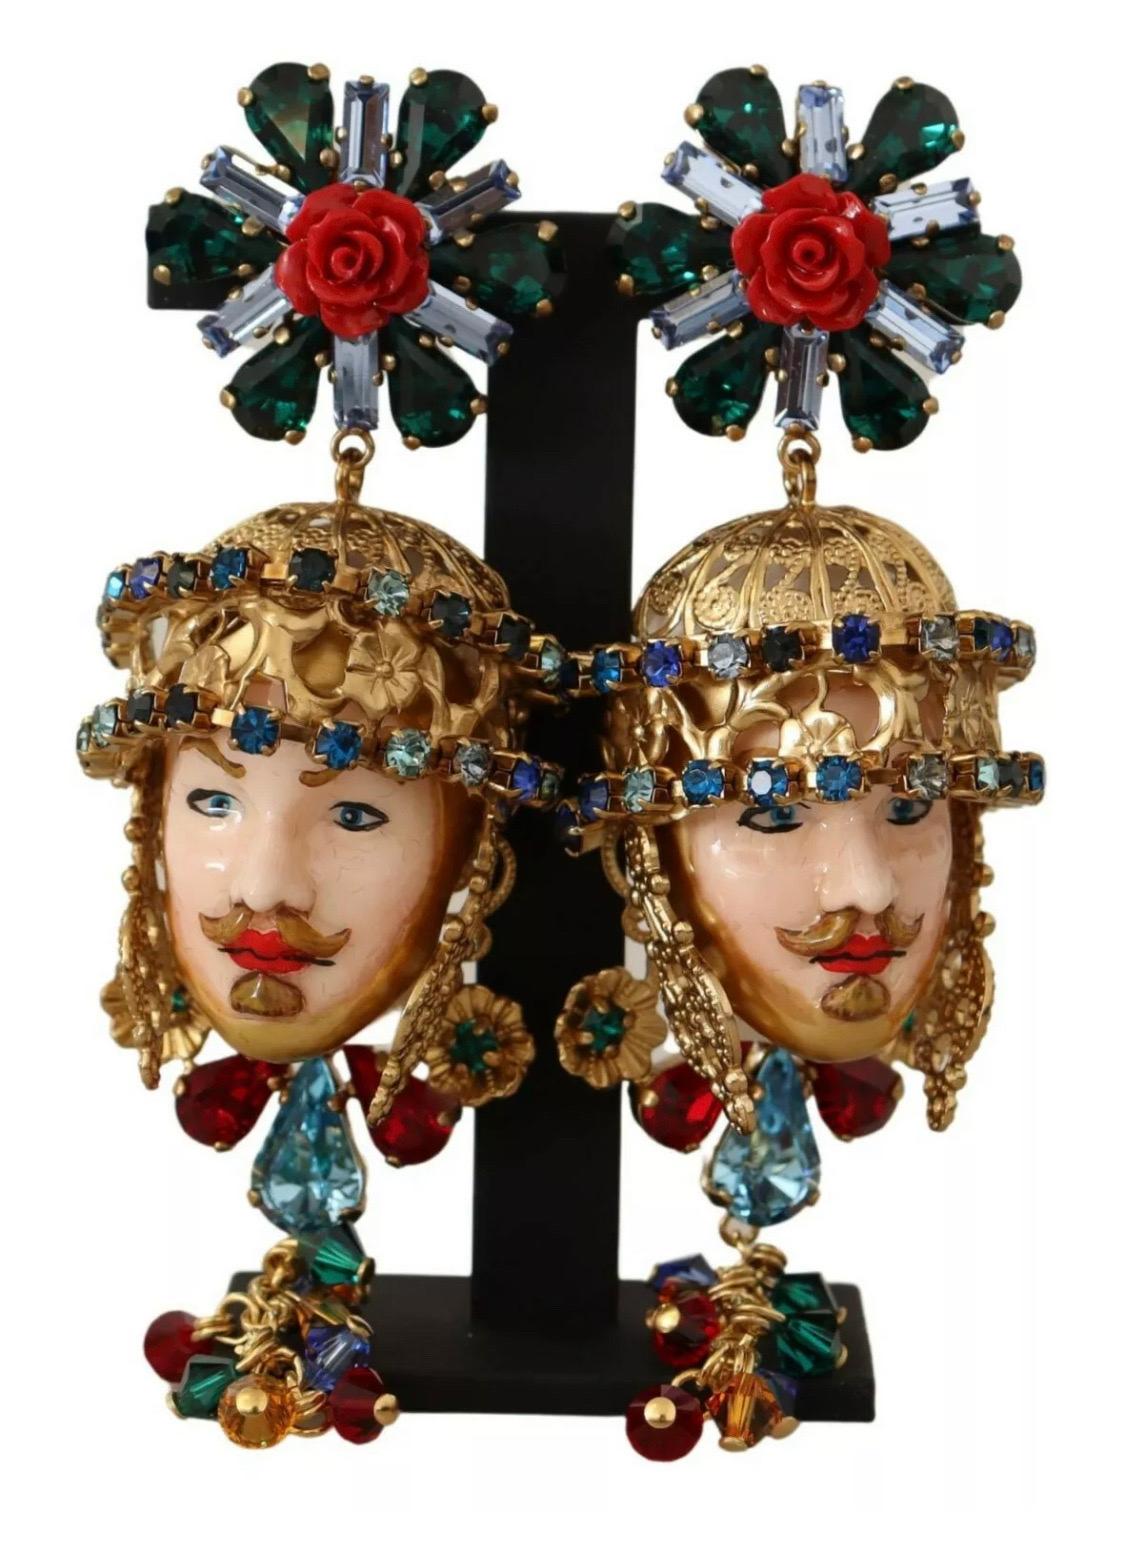 DOLCE & GABBANA

Gorgeous brand new with tags, 100% Authentic Dolce & Gabbana earrings.

Model: Clip-on, dangling
Motive: Pupi Carretto
Material: 50% Brass, 20% Glass, other
Color: Gold with multicolor crystals
Logo details
Made in Italy

Length: